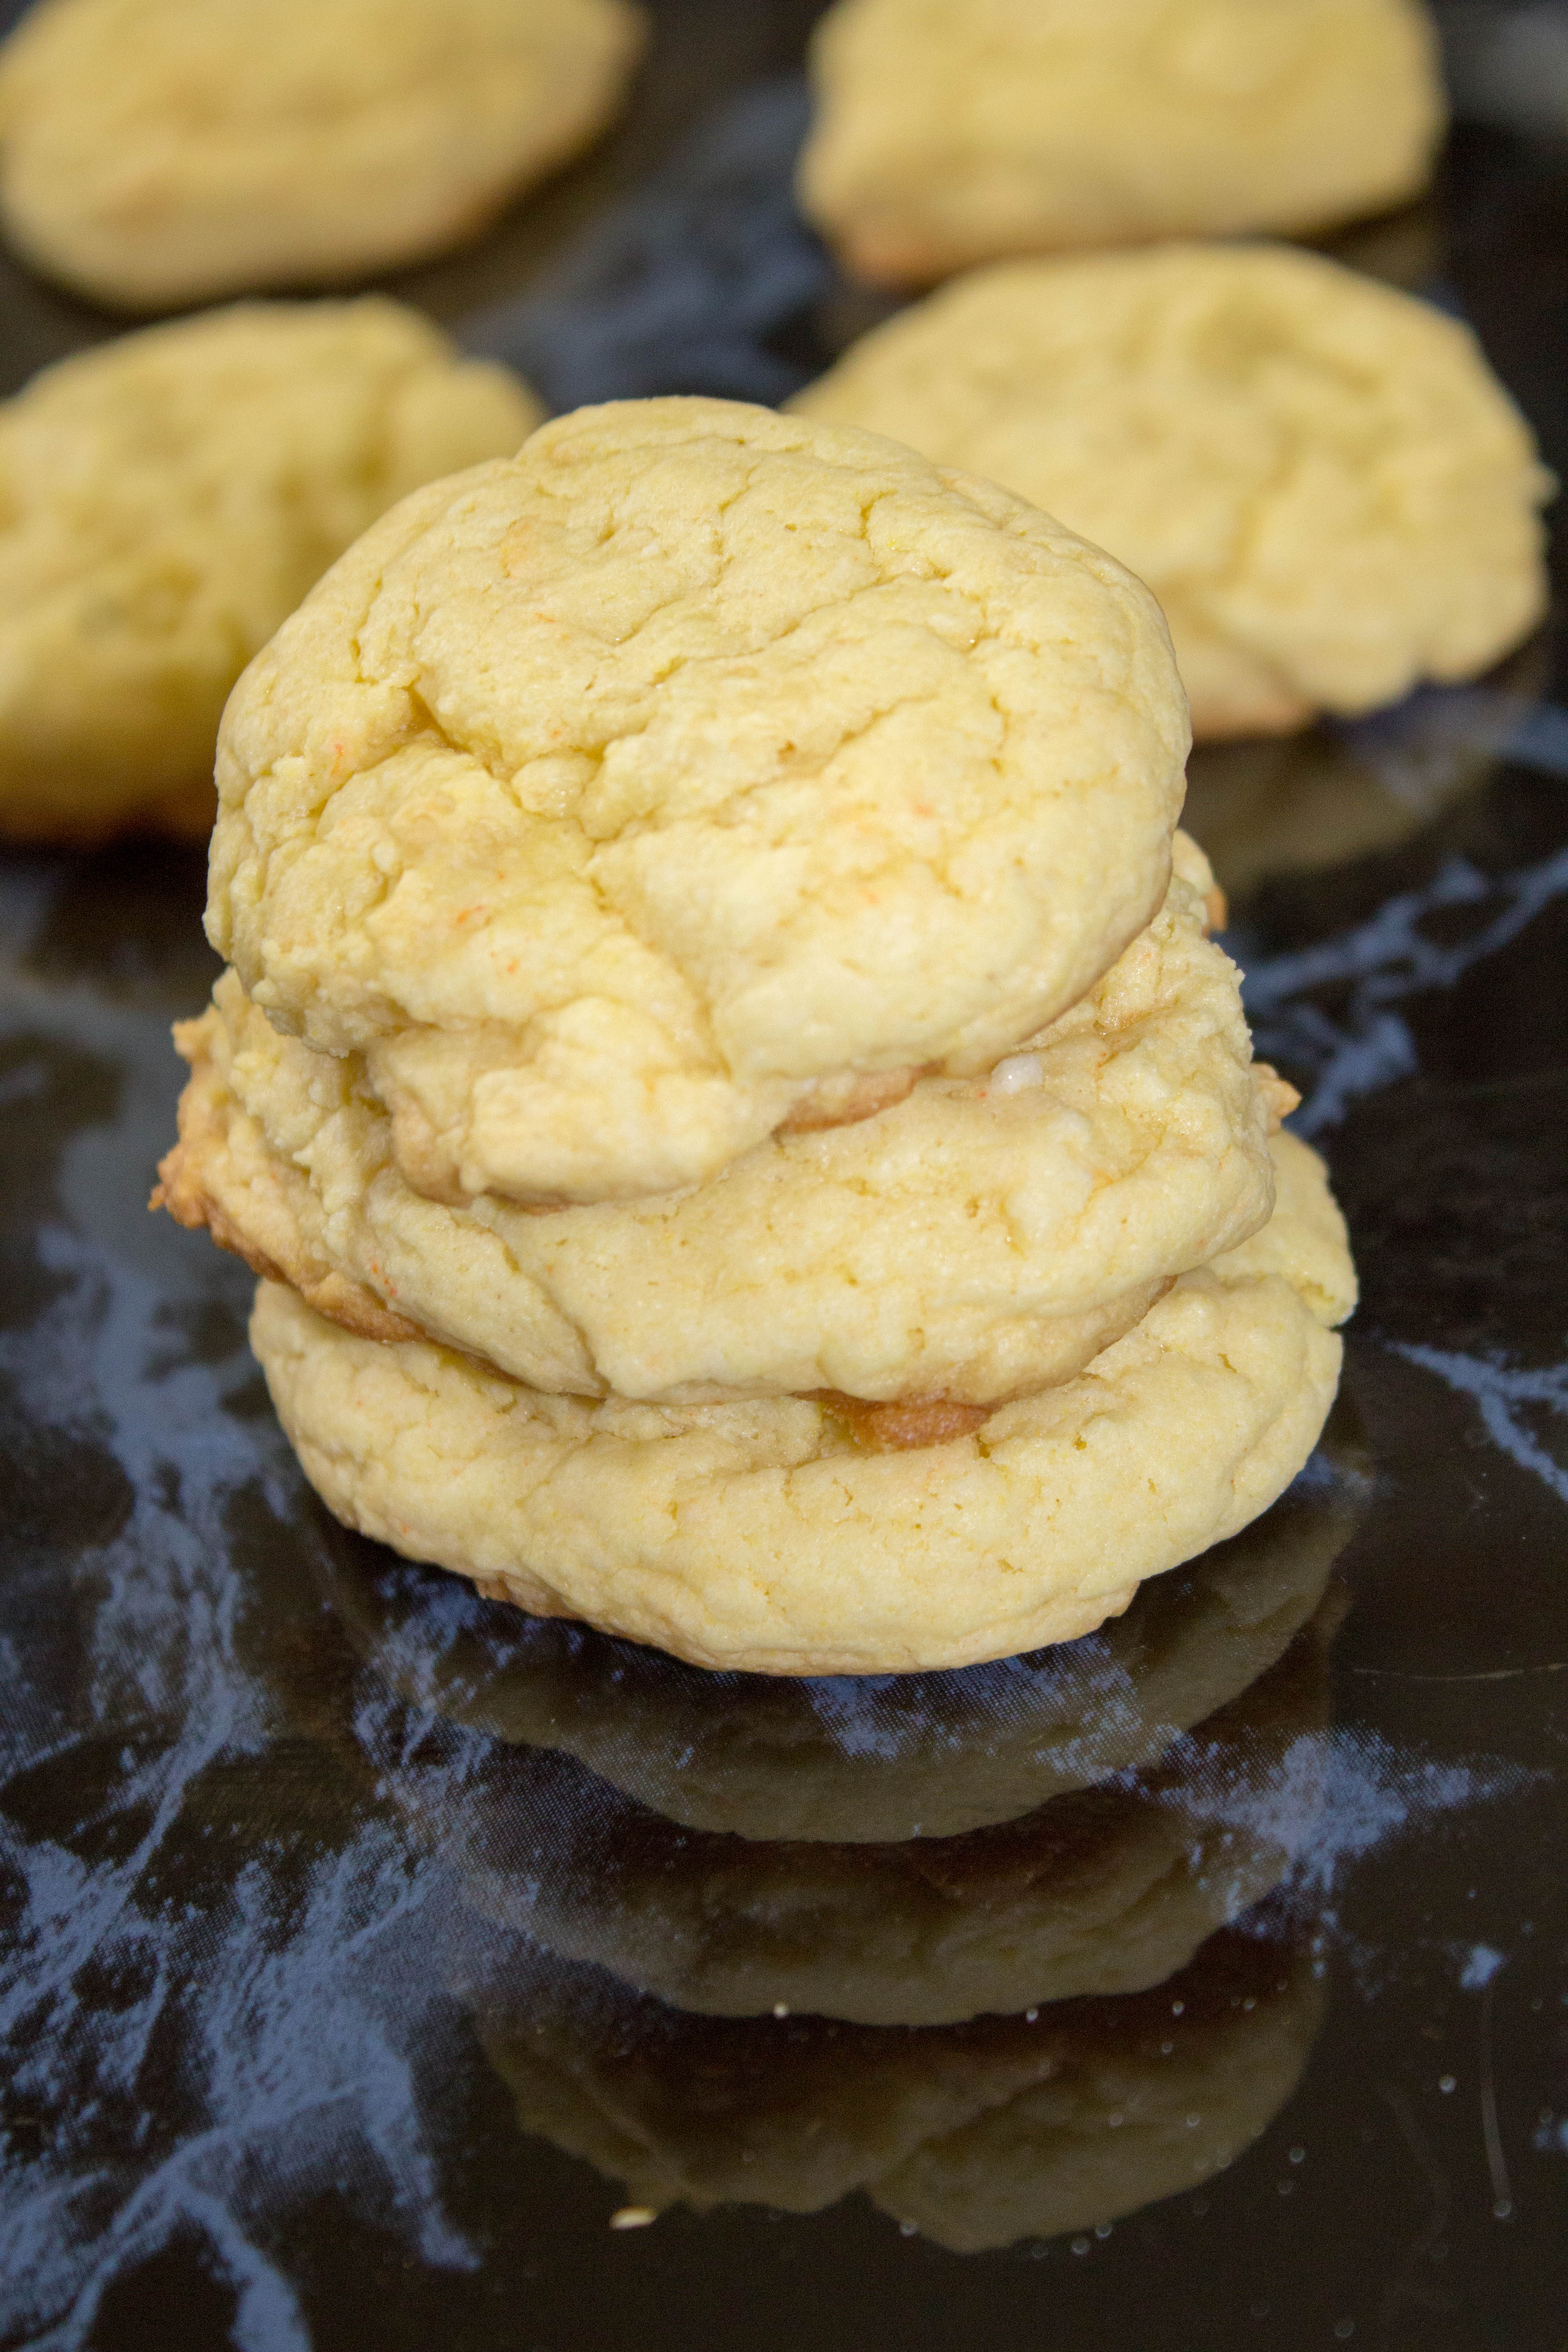 Cake mix cookies are a fast dessert that can be made easily with only 3 ingredients. Easy to make cookies that can be made in a lot of different flavors.